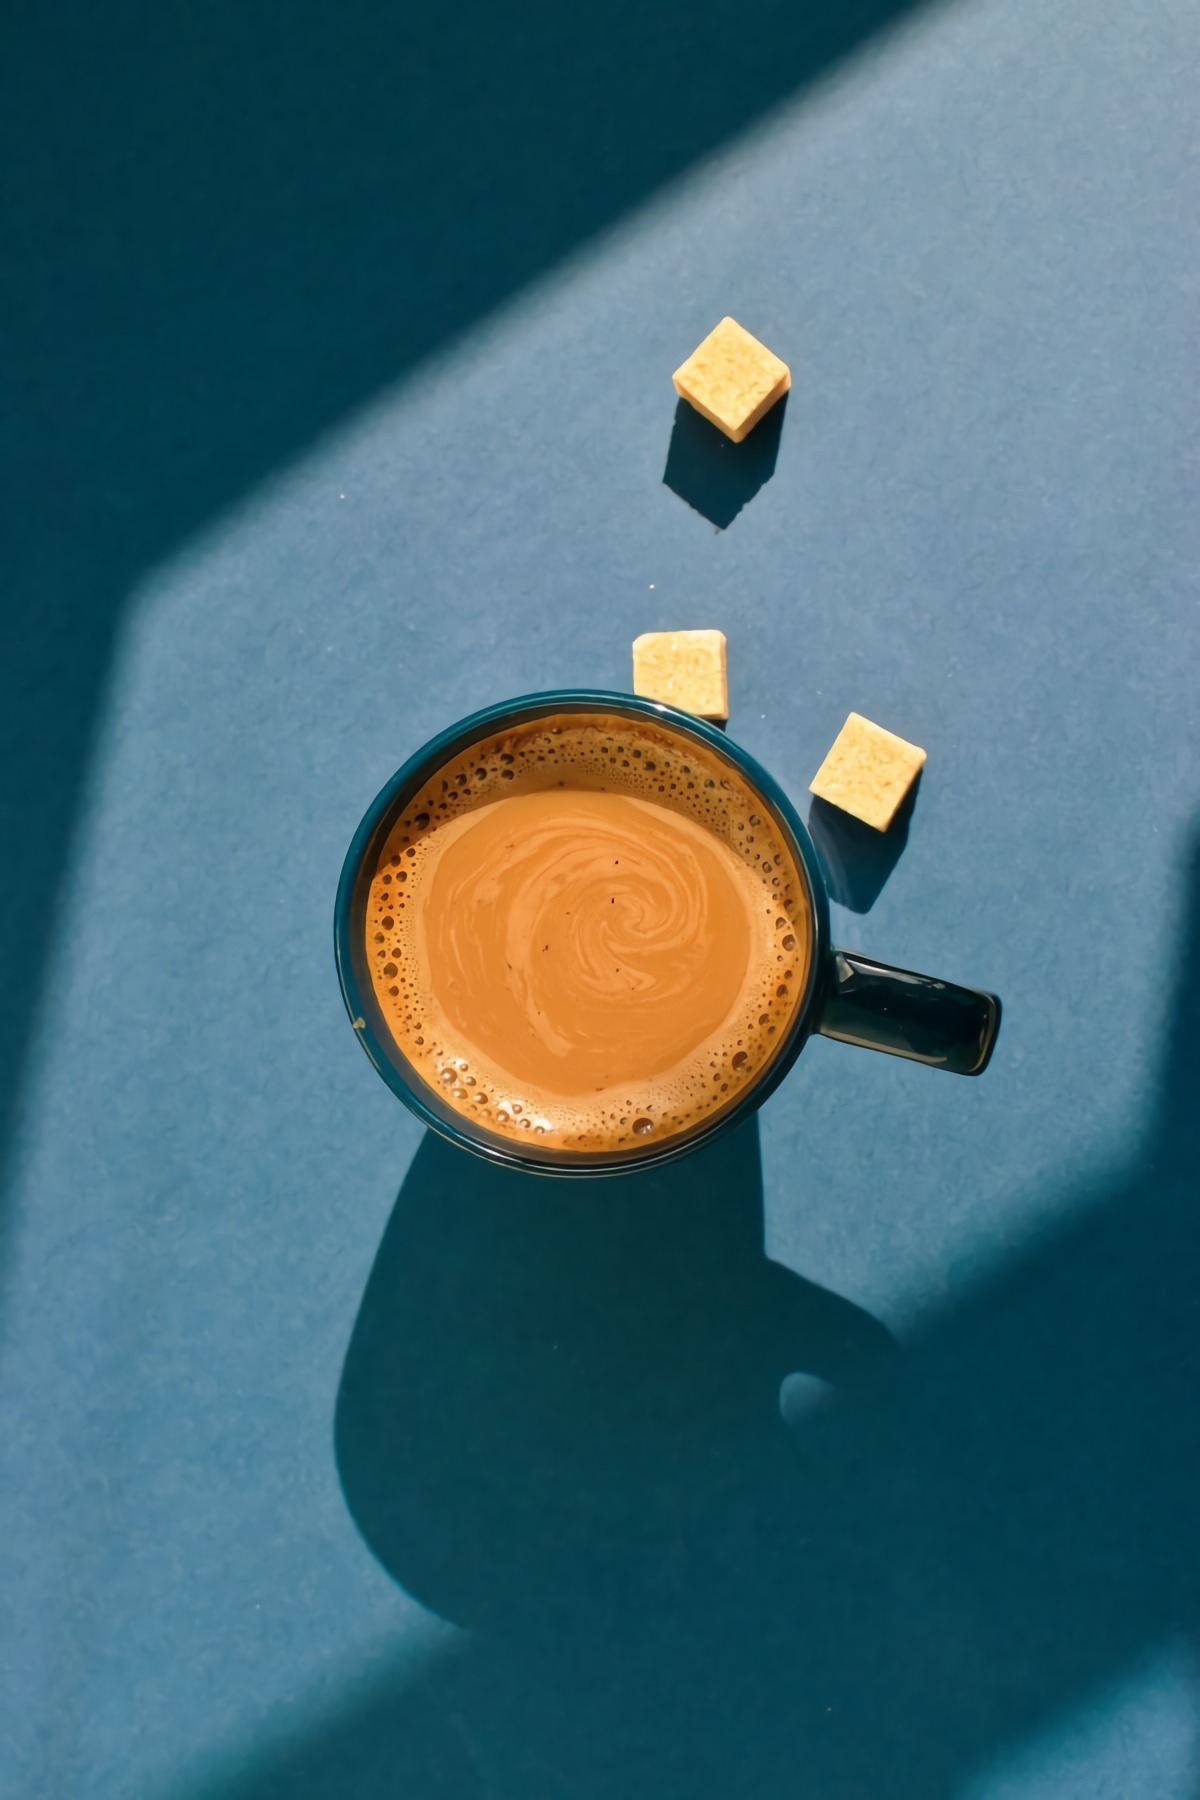 5 Things You Can Add to Your Coffee to Make It Healthier